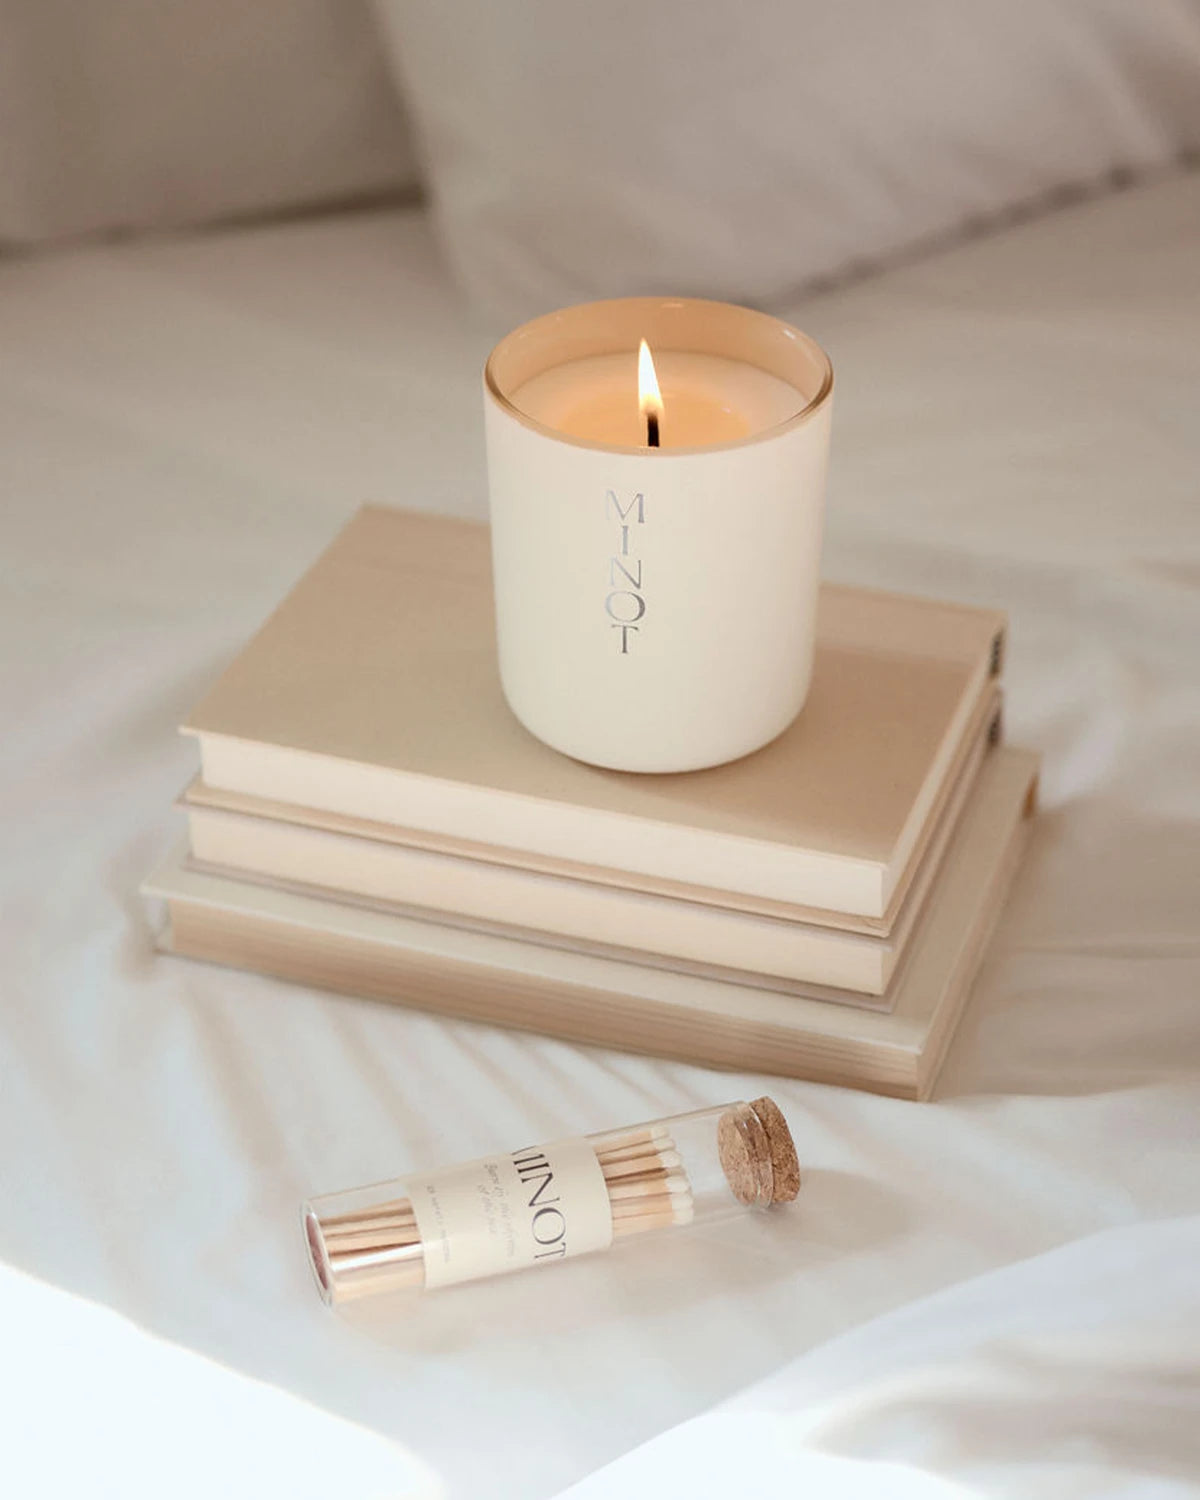 MINOT's Daybreak candle aesthetic is minimalist and natural, with scent notes of rose, amber and oud